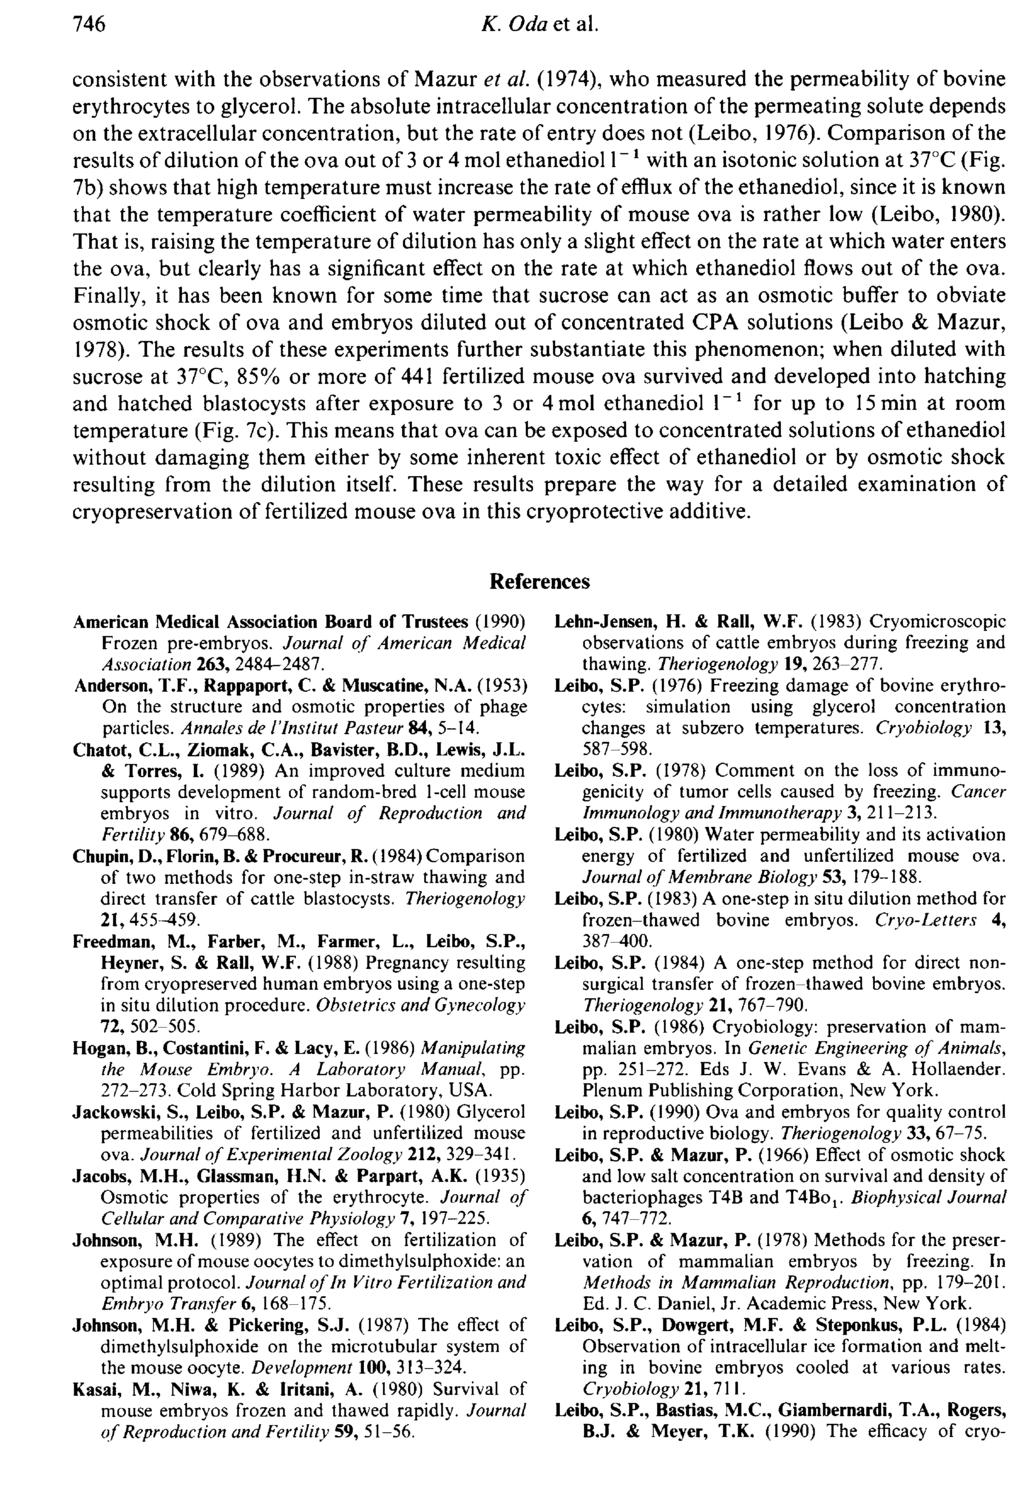 consistent with the observations of Mazur et al (1974), who measured the permeability of bovine erythrocytes to glycerol.